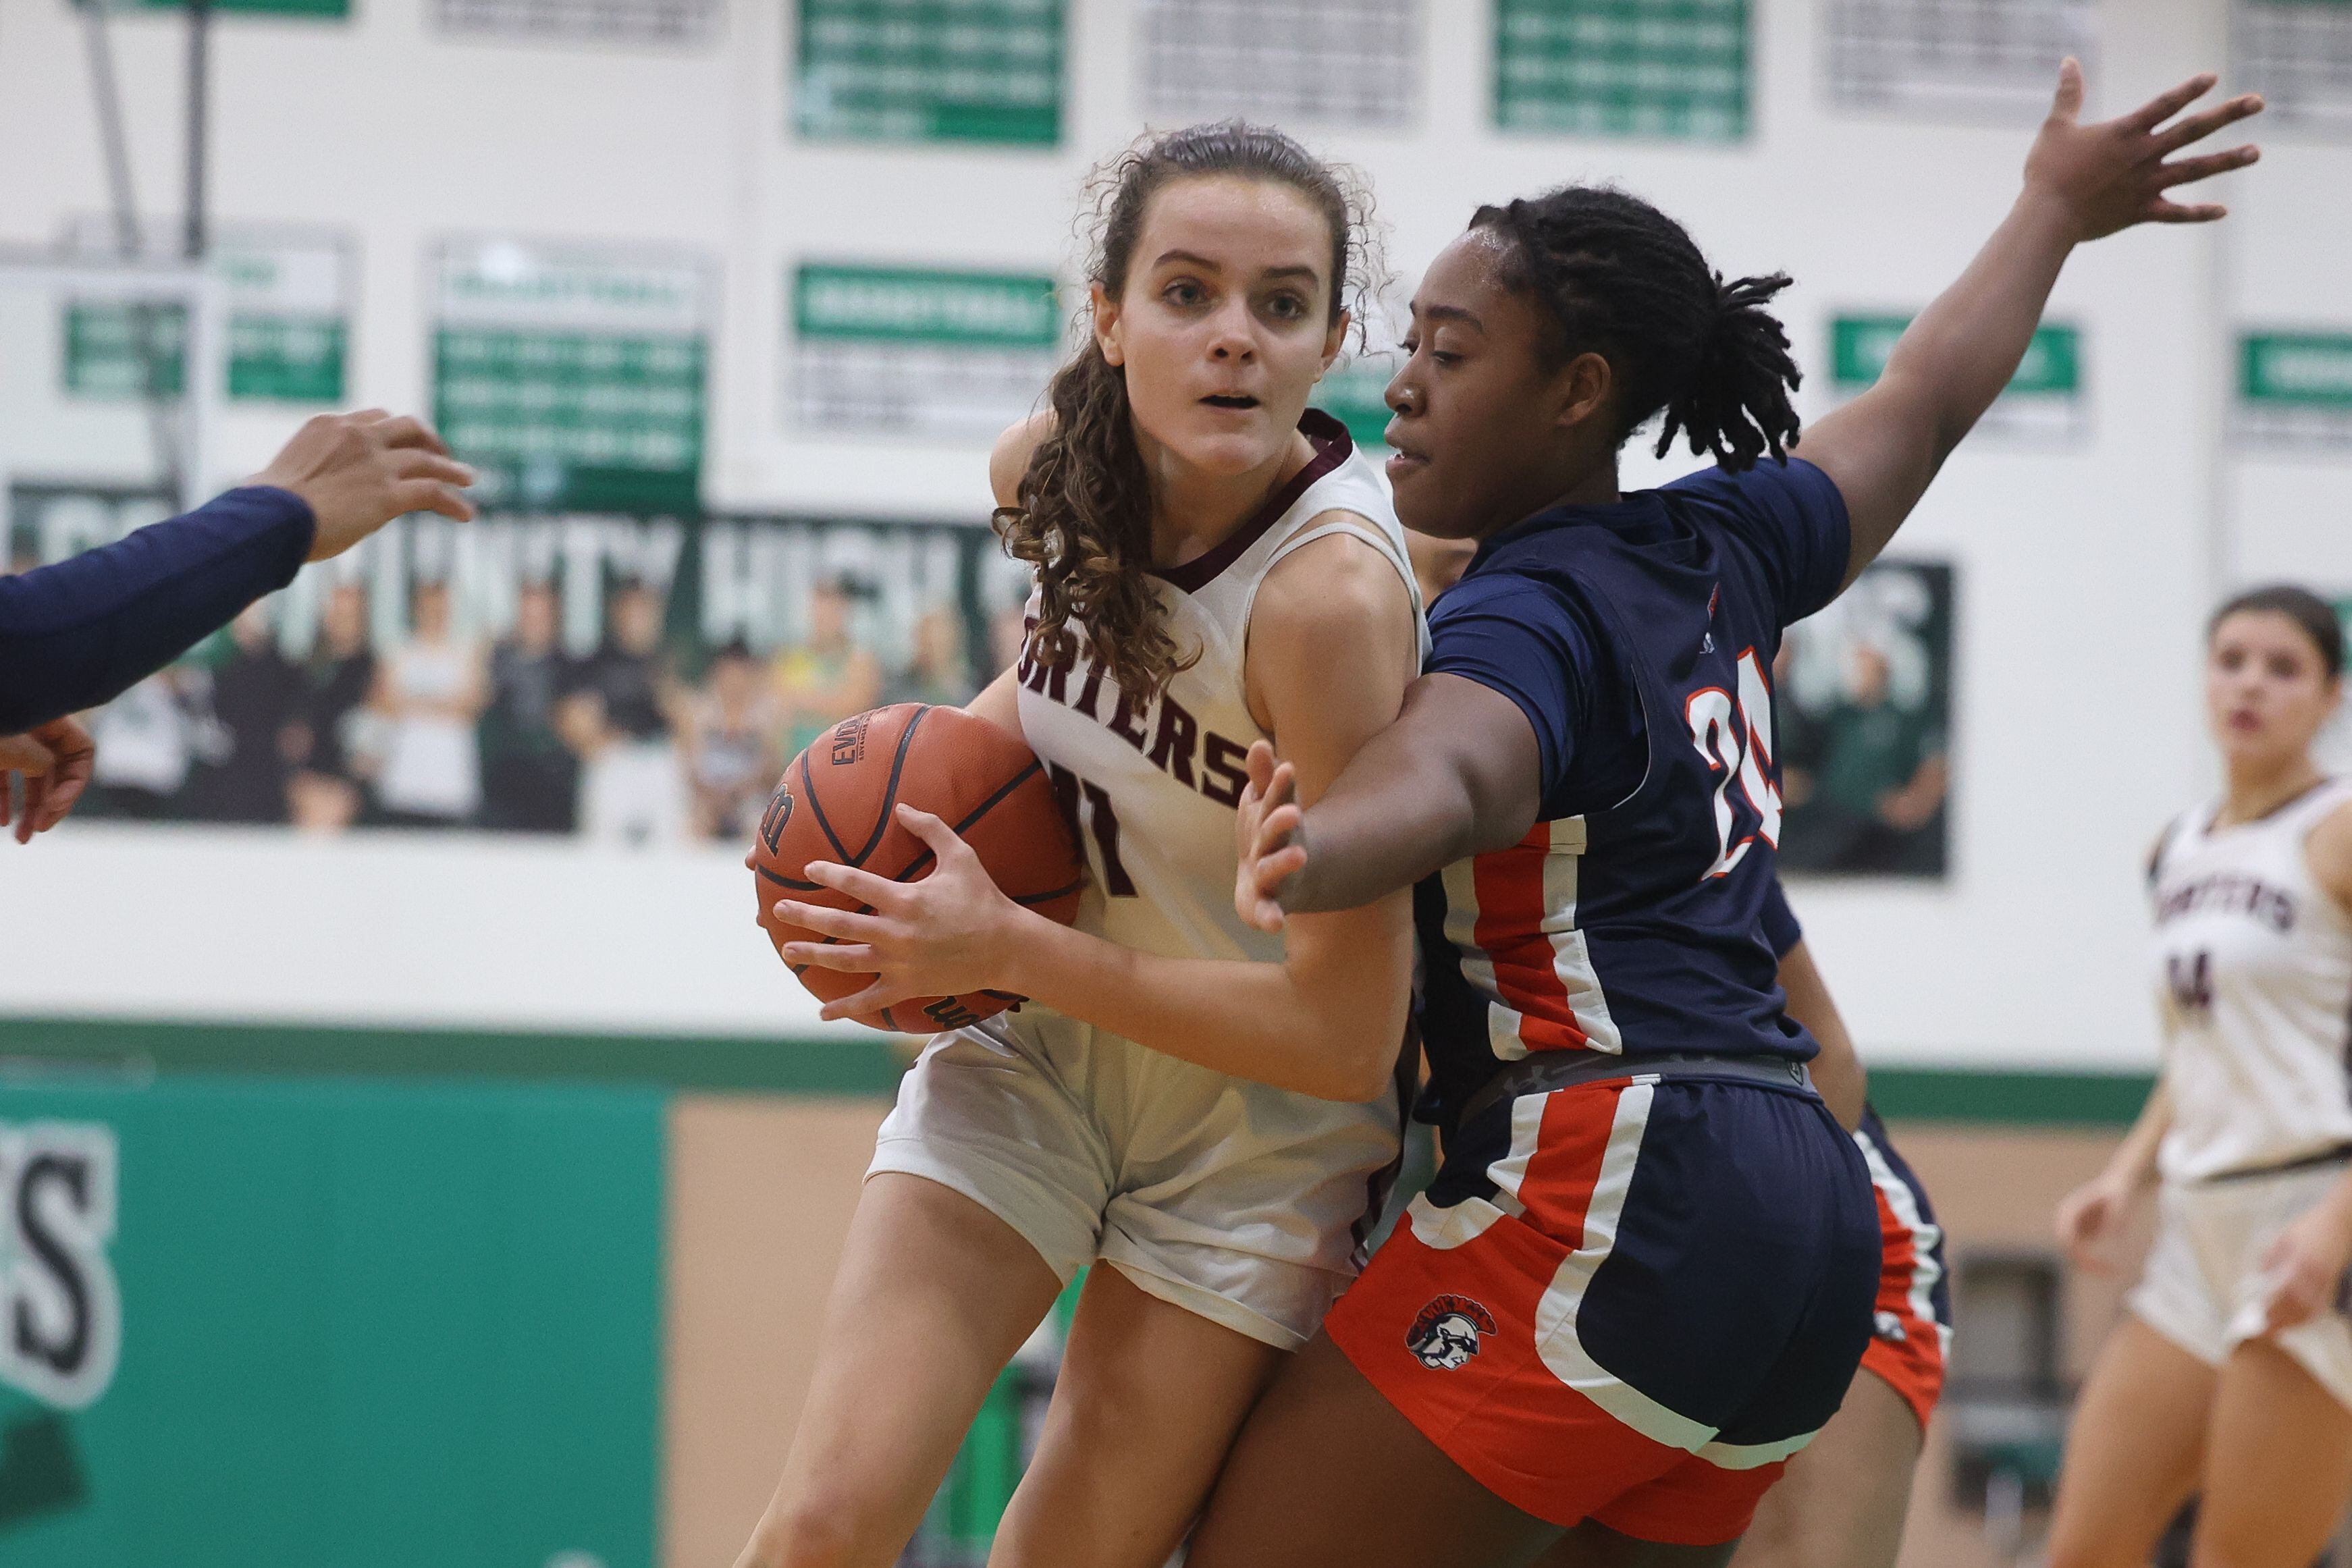 Lockport’s Laura Arstikaitis drives past Romeoville’s Laila Houseworth in the Oak Lawn Holiday Tournament championship on Saturday, Dec.16th in Oak Lawn.